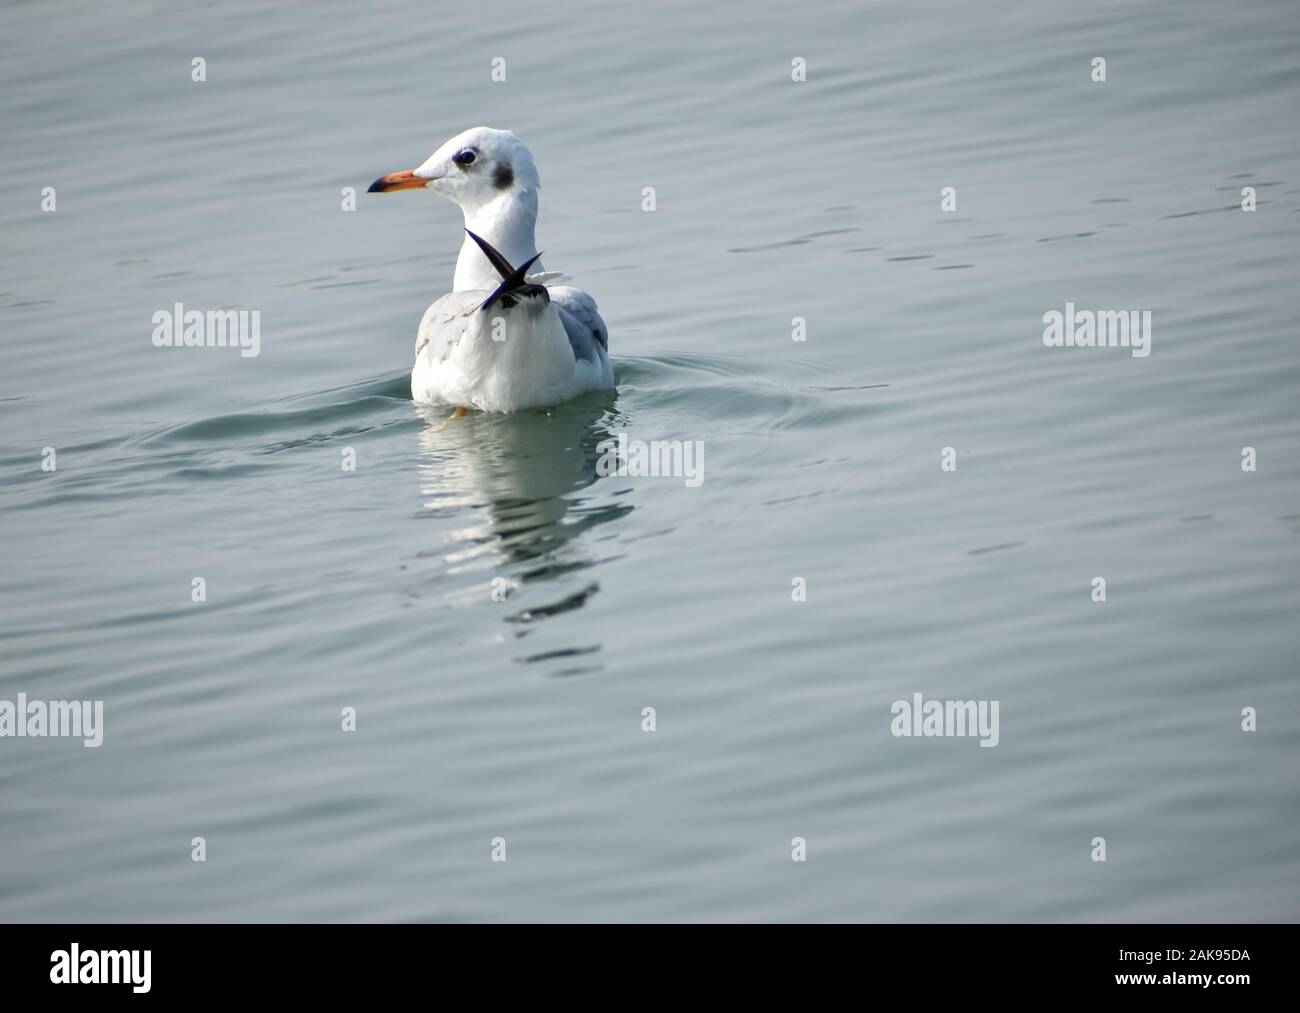 Siberian bird swimming in a lake, migrated from different country Stock Photo